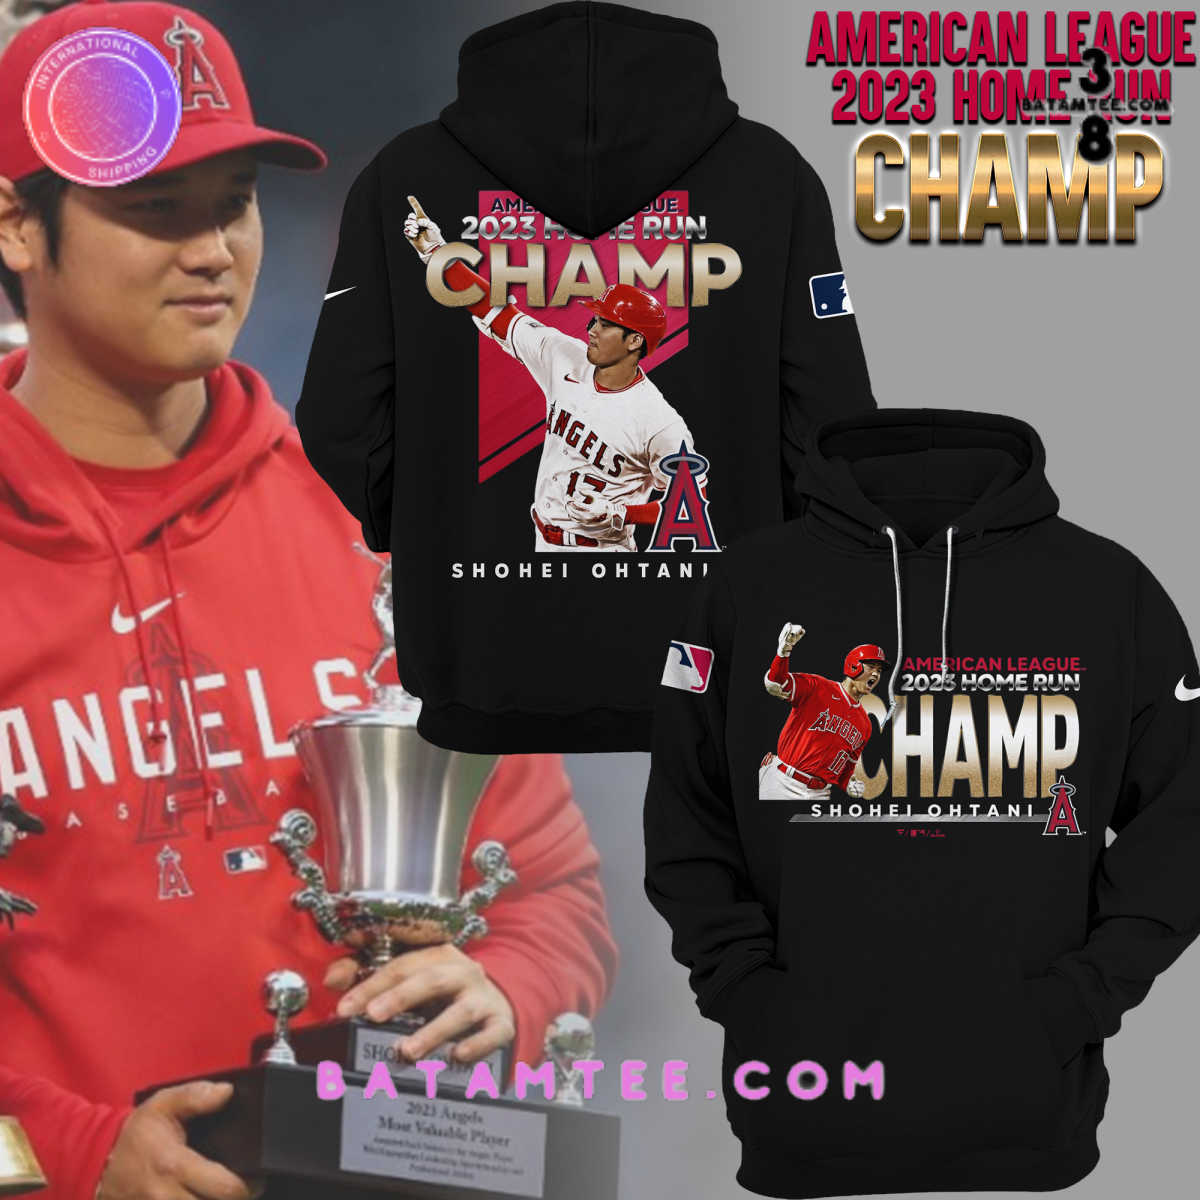 Los Angeles Angels Shohei Ohtani 2023 Home Run Champ Black Hoodie's Overview - Batamtee Shop - Threads & Totes: Your Style Destination